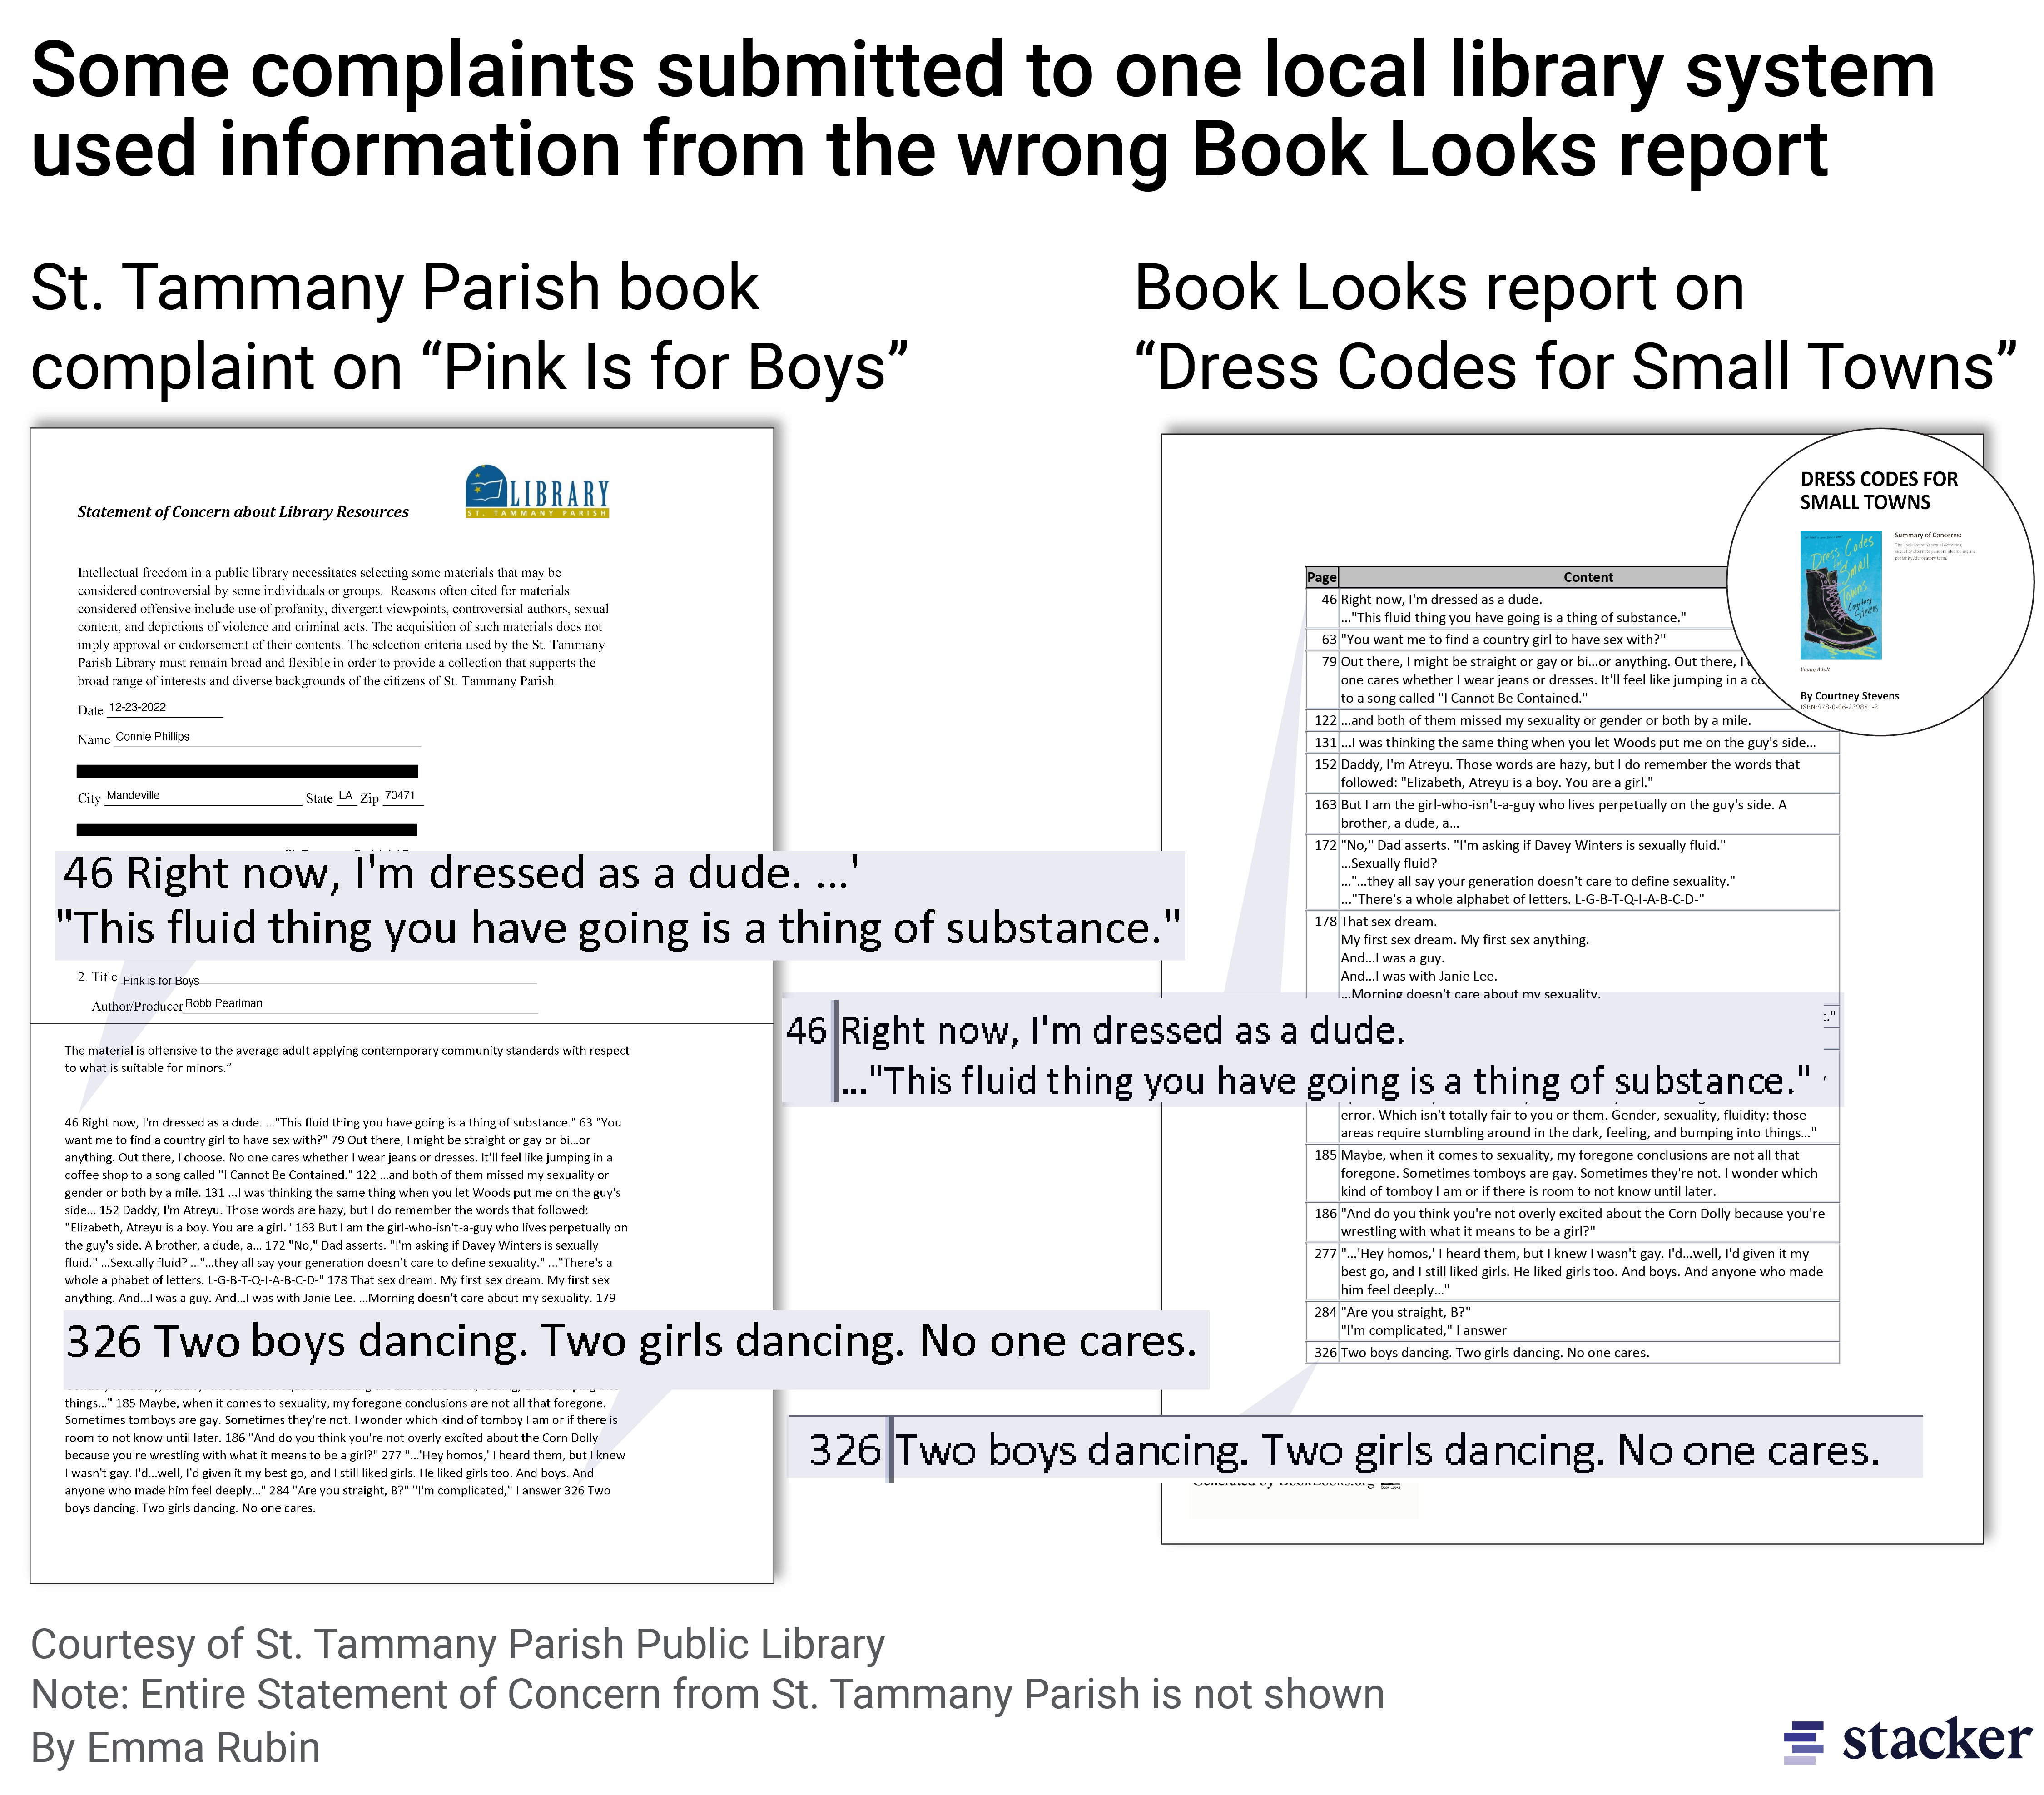 Side-by-side documents showing some complaints submitted to St. Tammany Parish Public Library used information from the wrong Book Looks report.